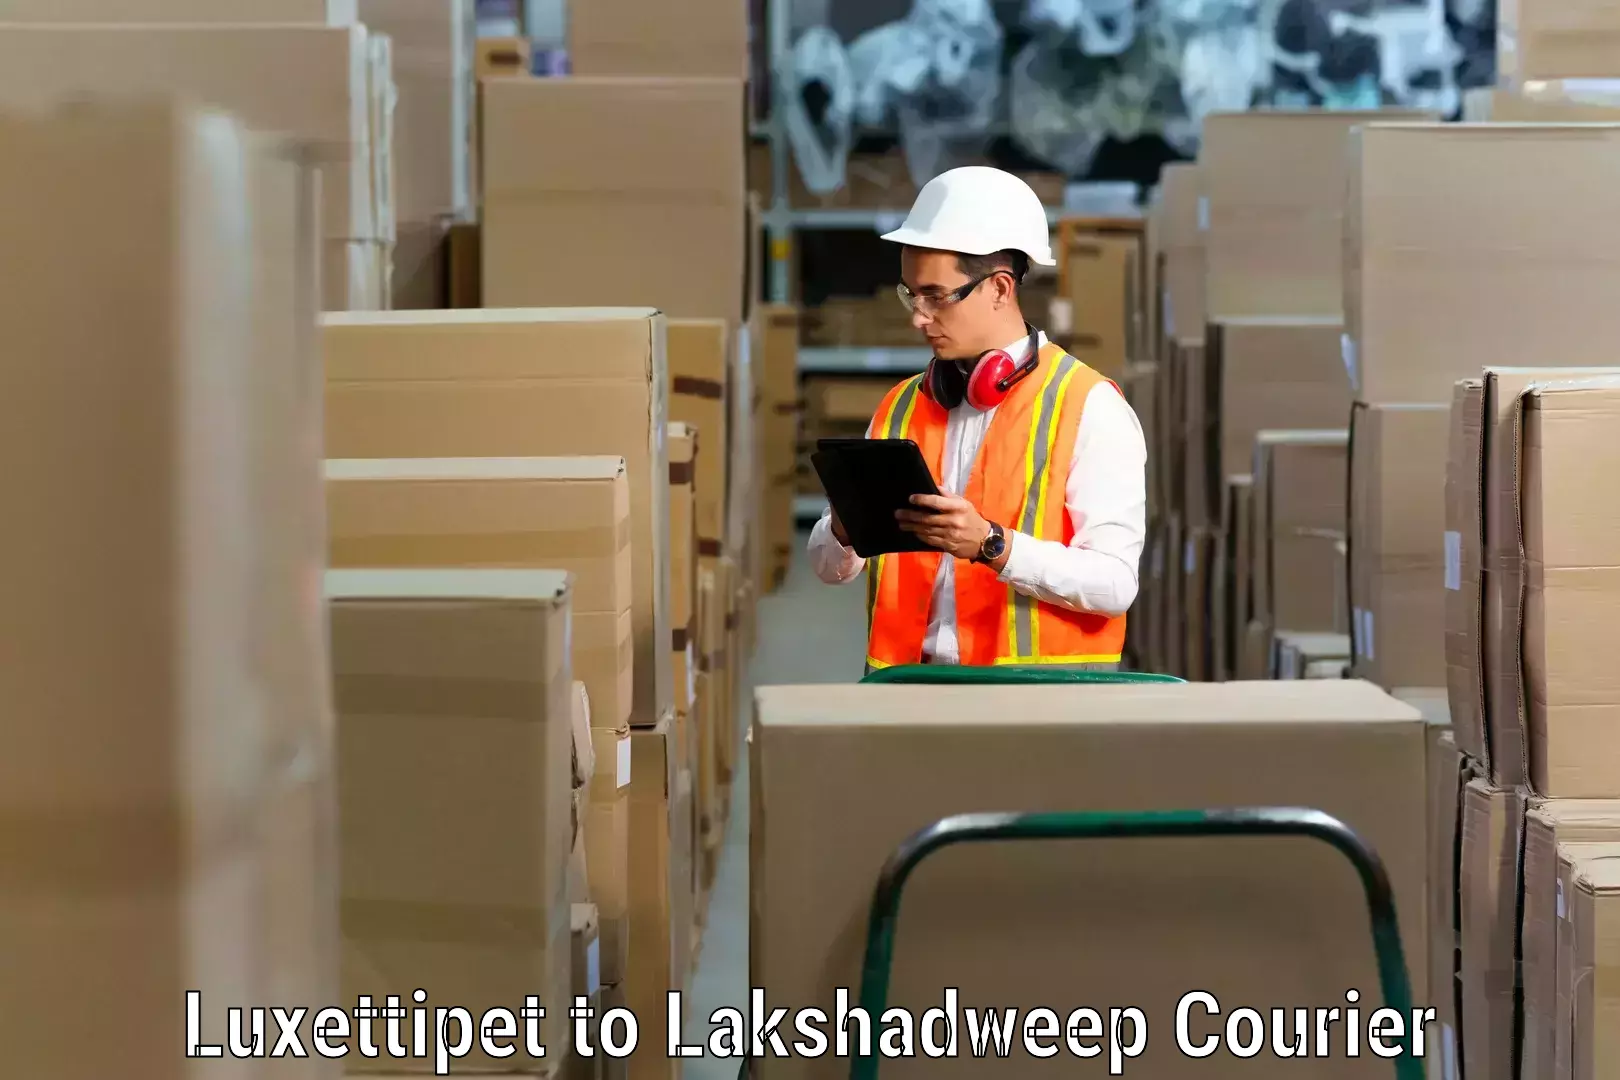 Home moving specialists Luxettipet to Lakshadweep